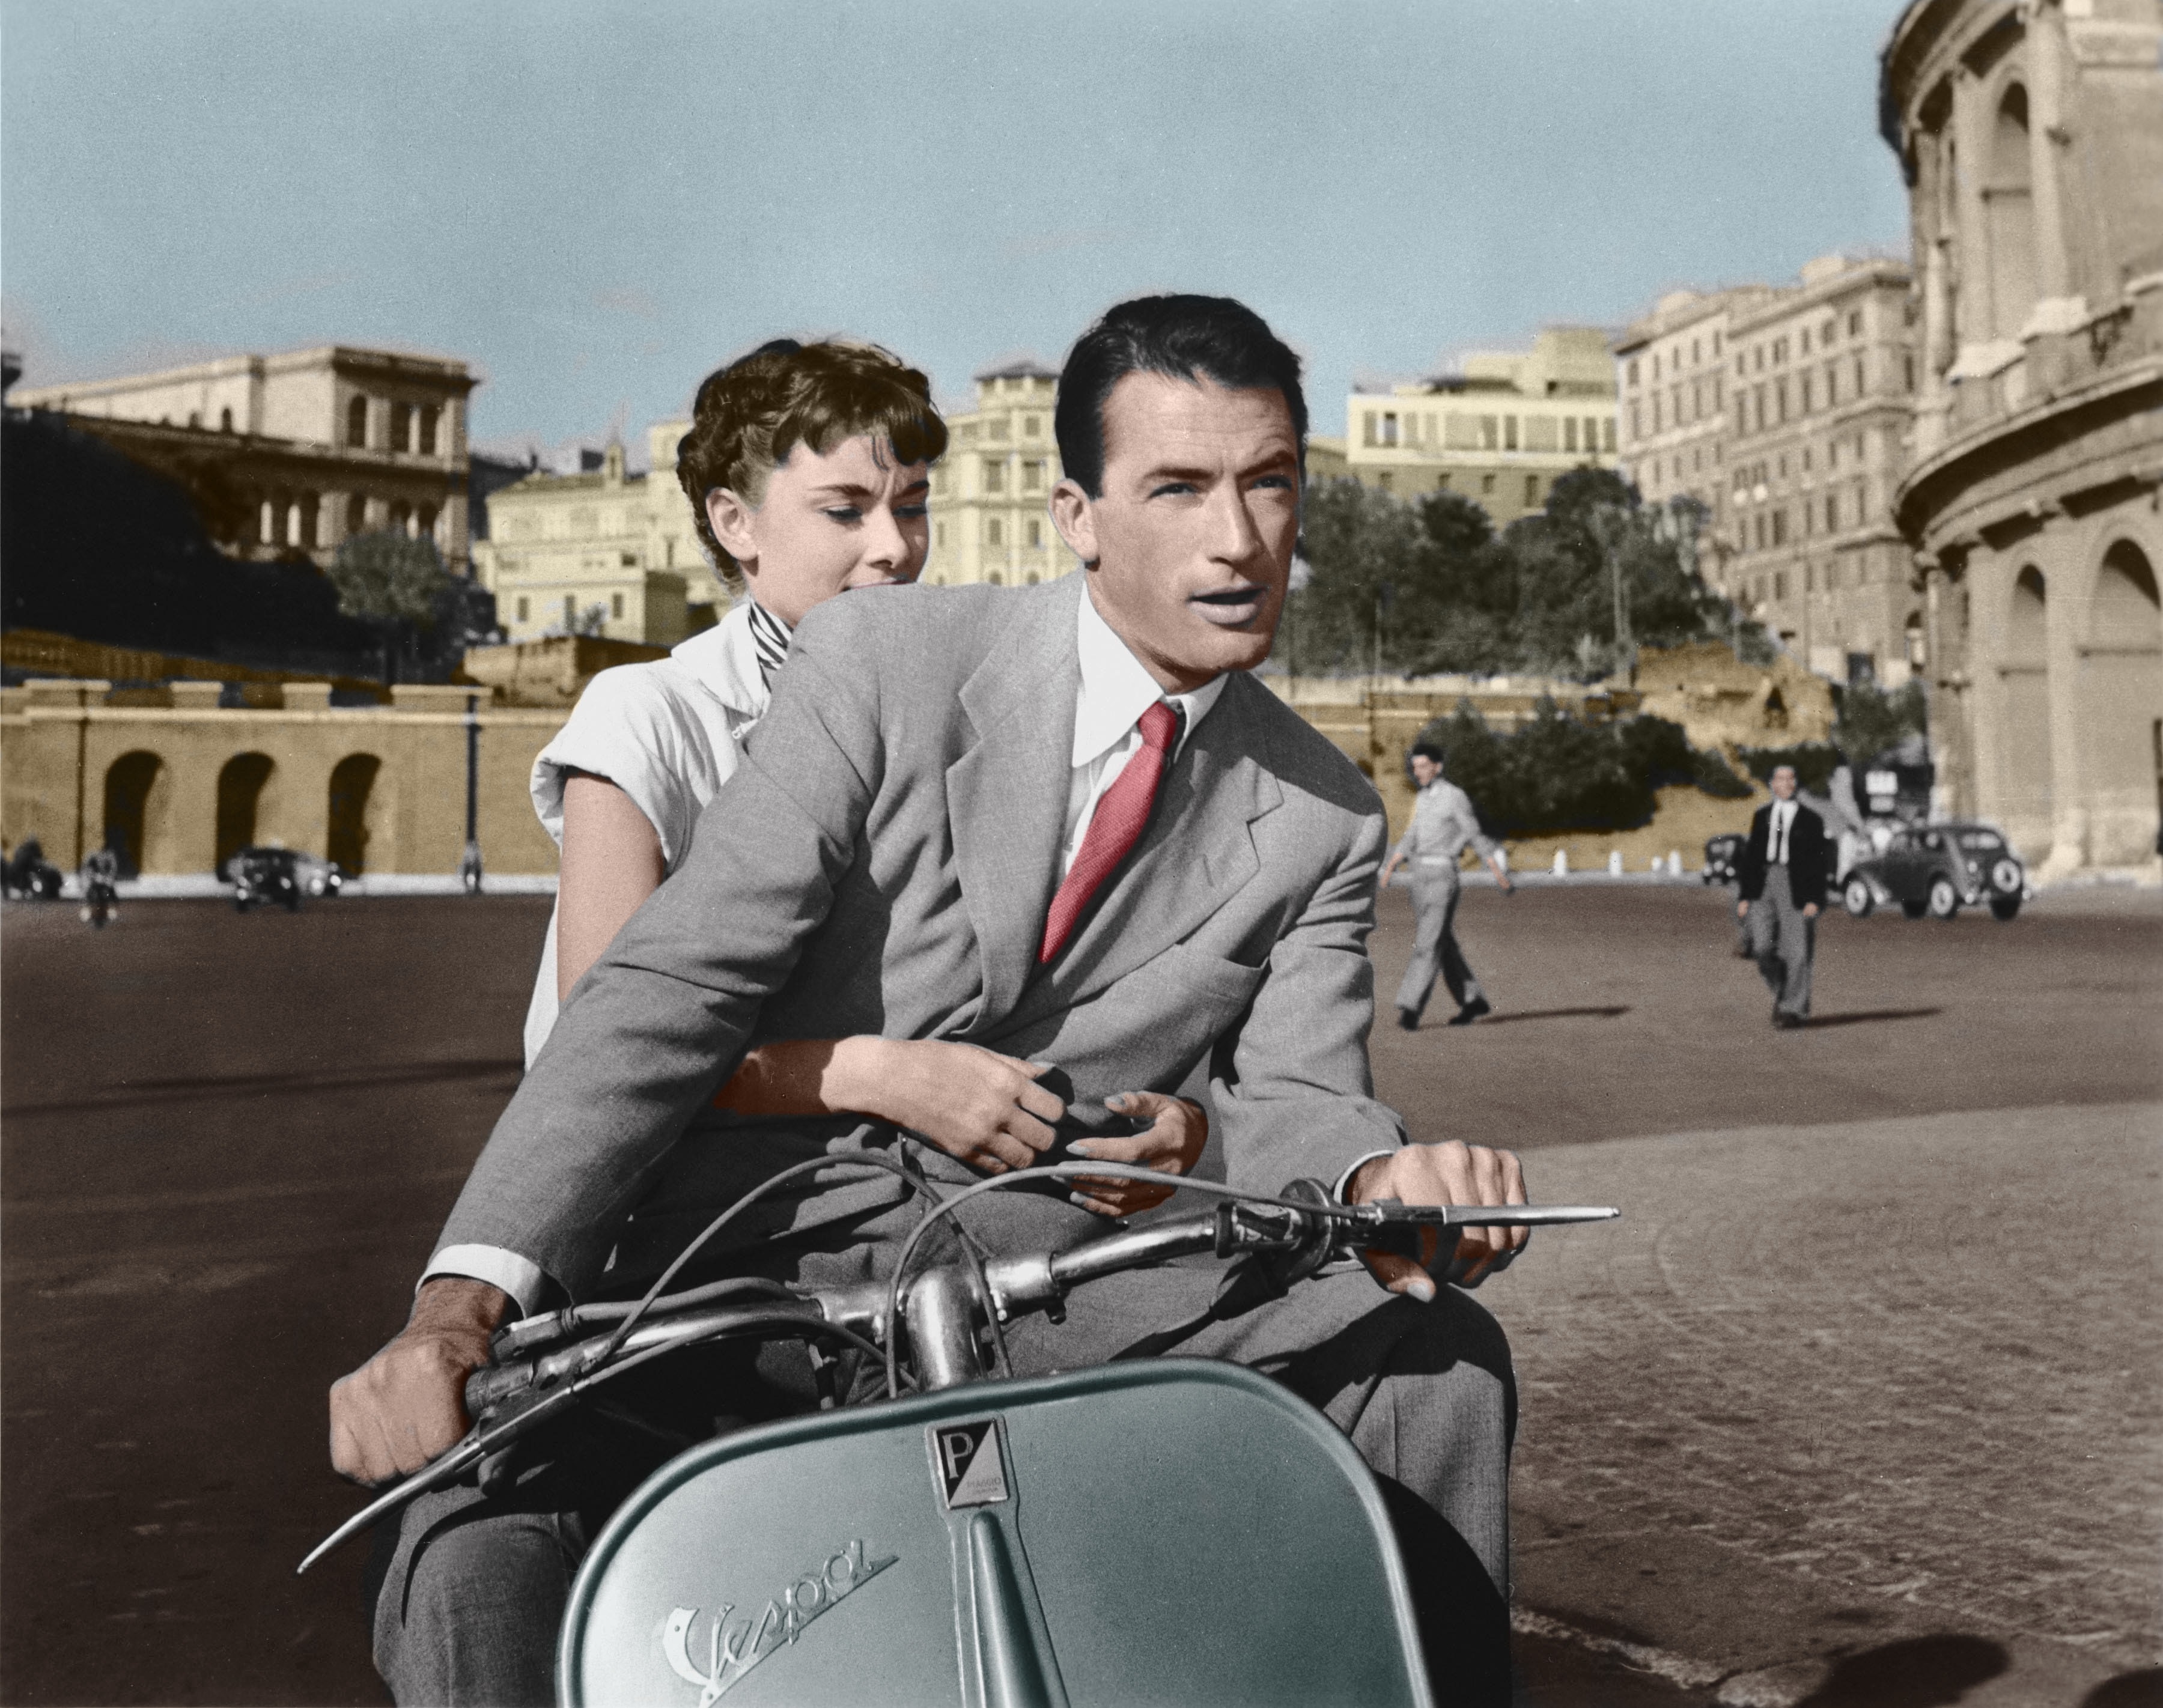 The 1953 film Roman Holiday, set in Italy